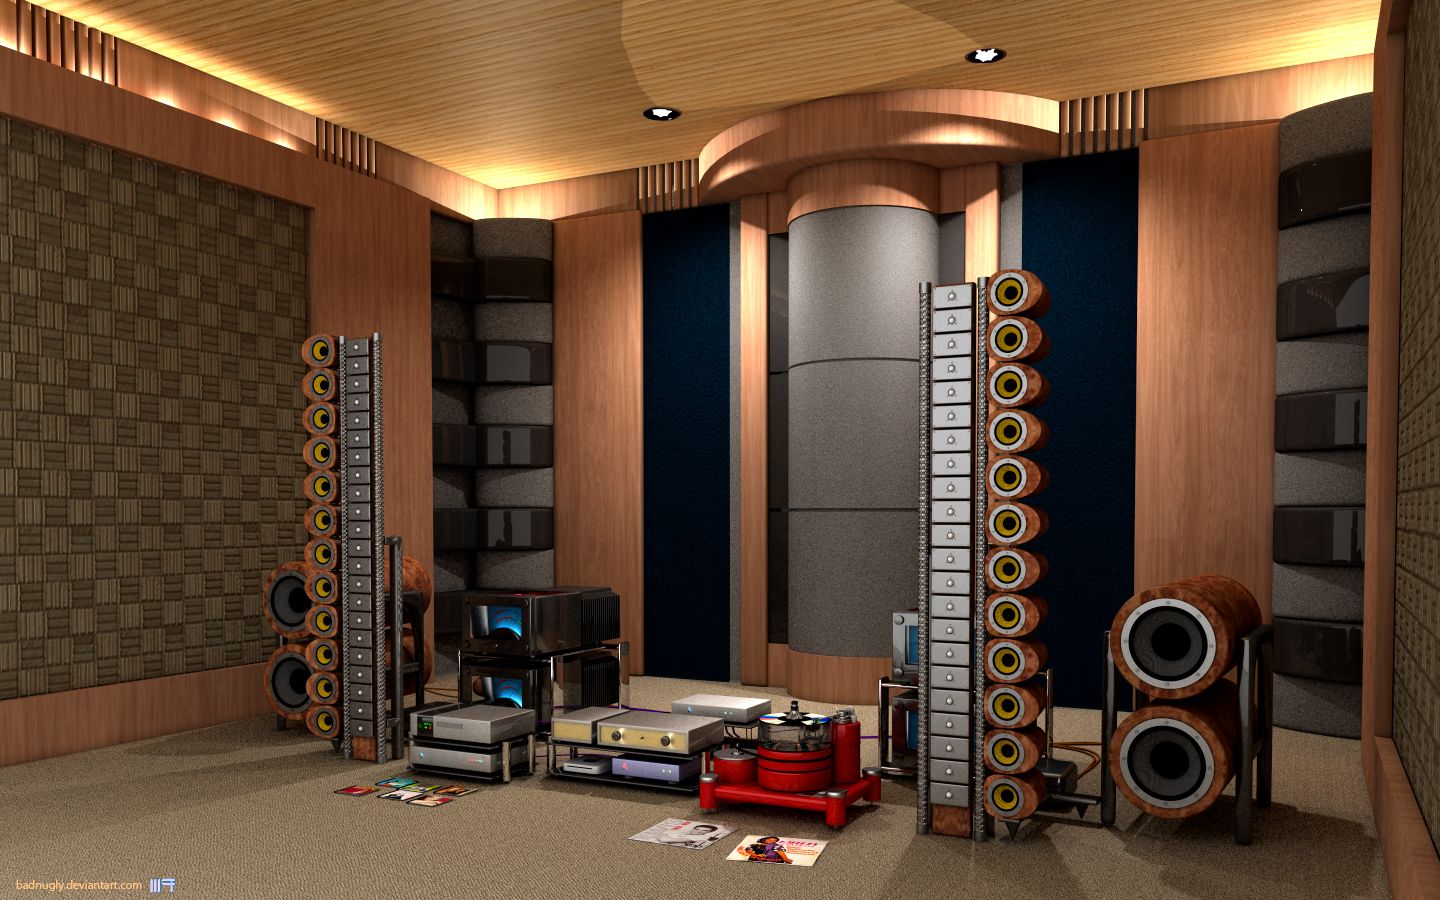 Hifi Wallpaper. Hifi Audio Wallpaper, Hifi Wallpaper and